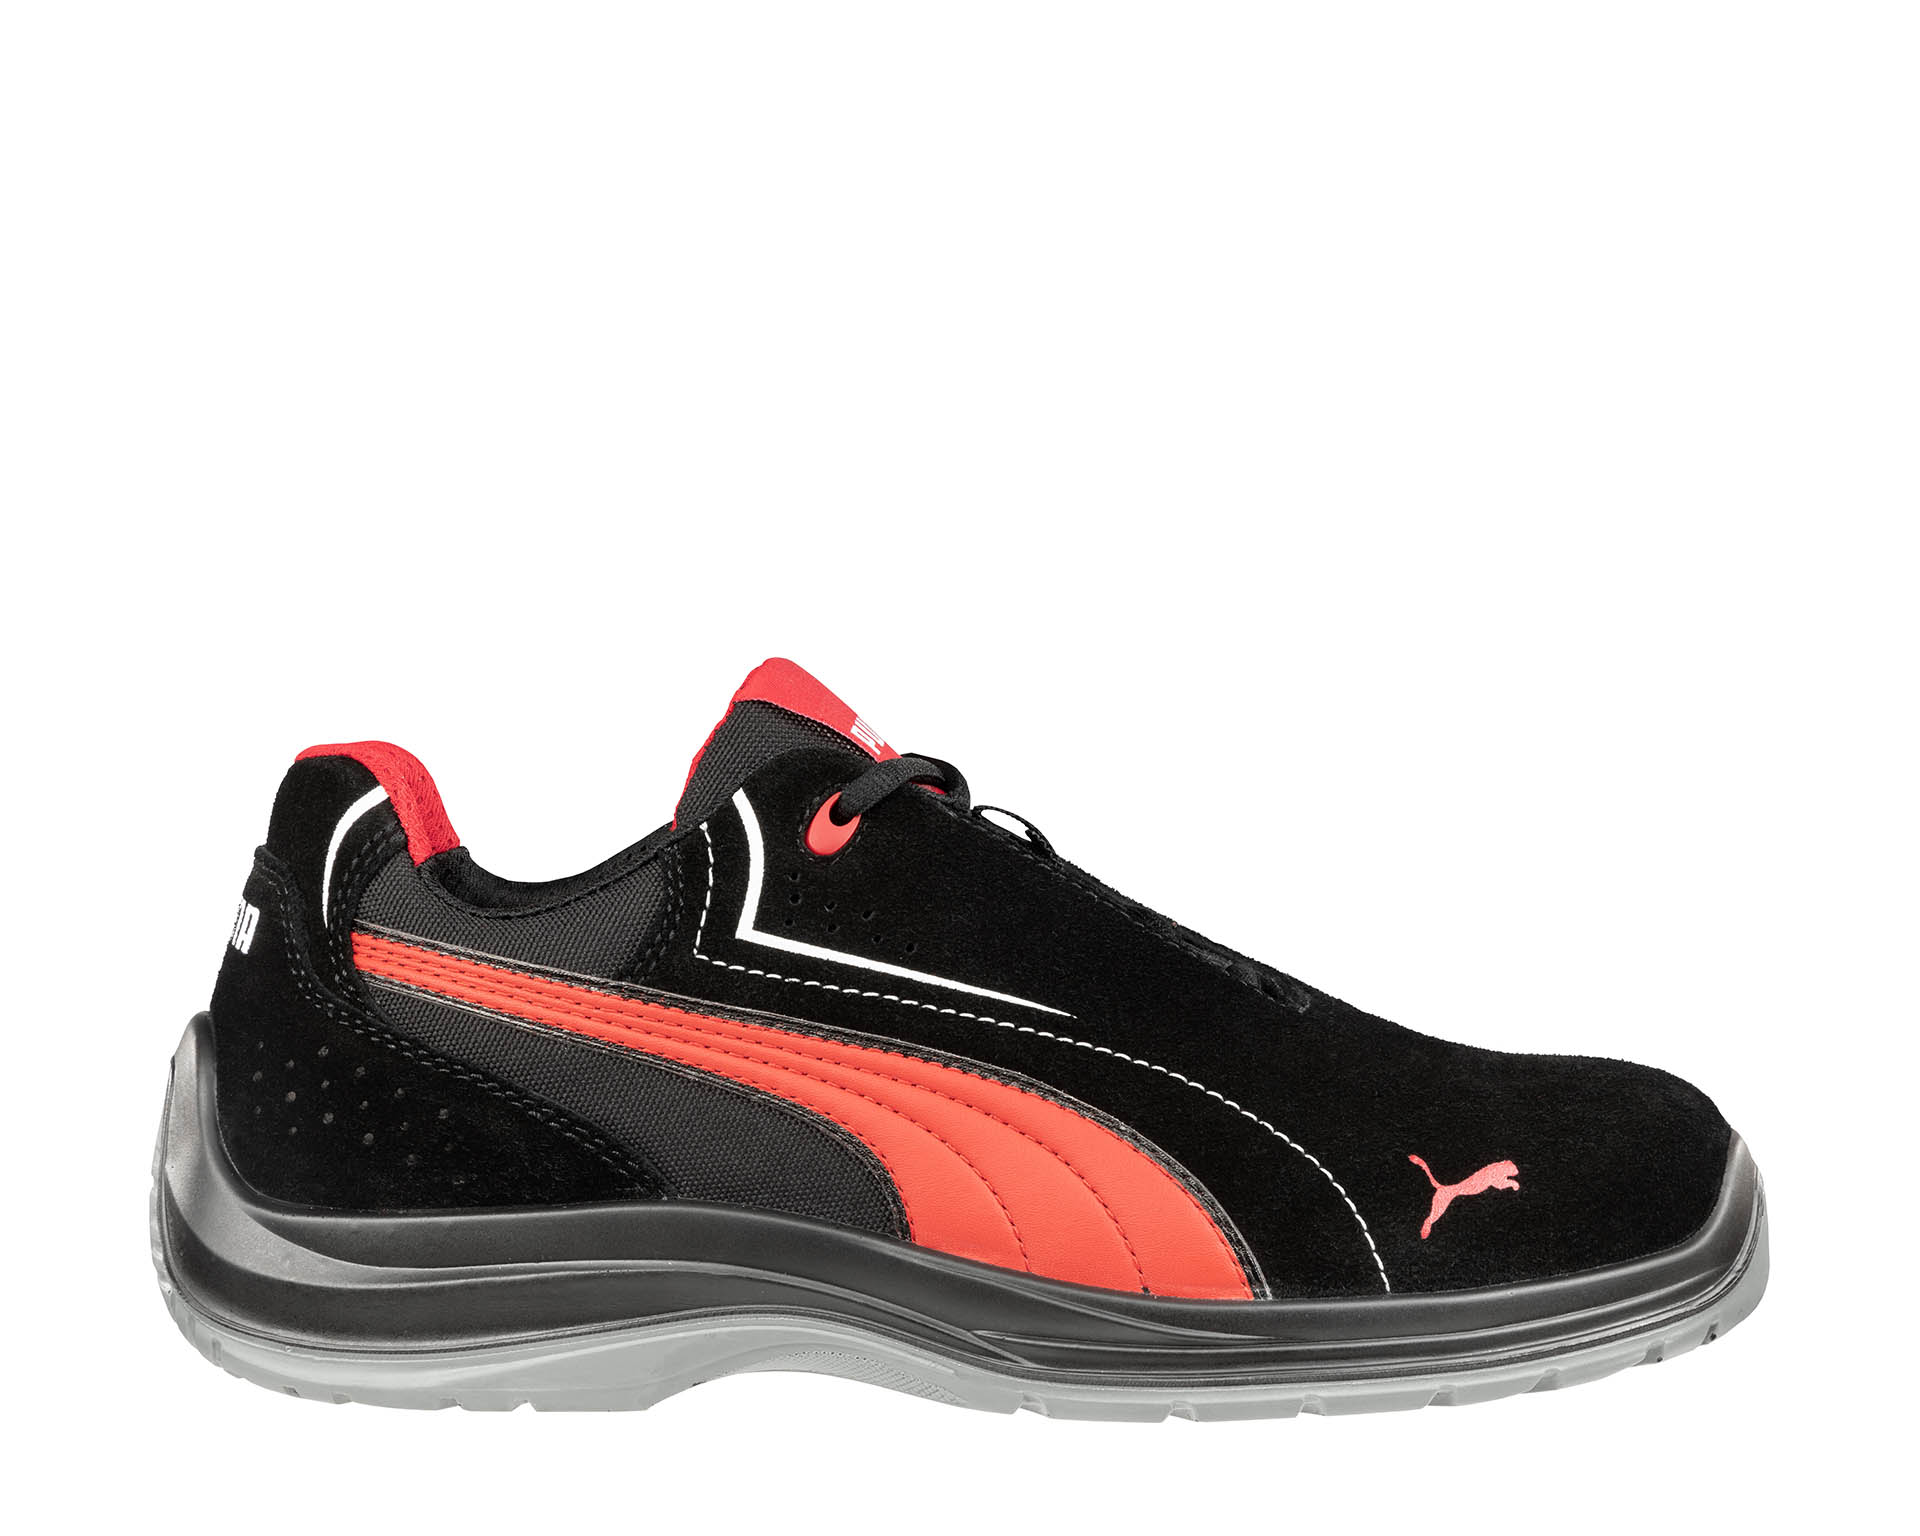 PUMA SAFETY safety shoes S3 ESD SRC TOURING BLACK LOW | Puma Safety English